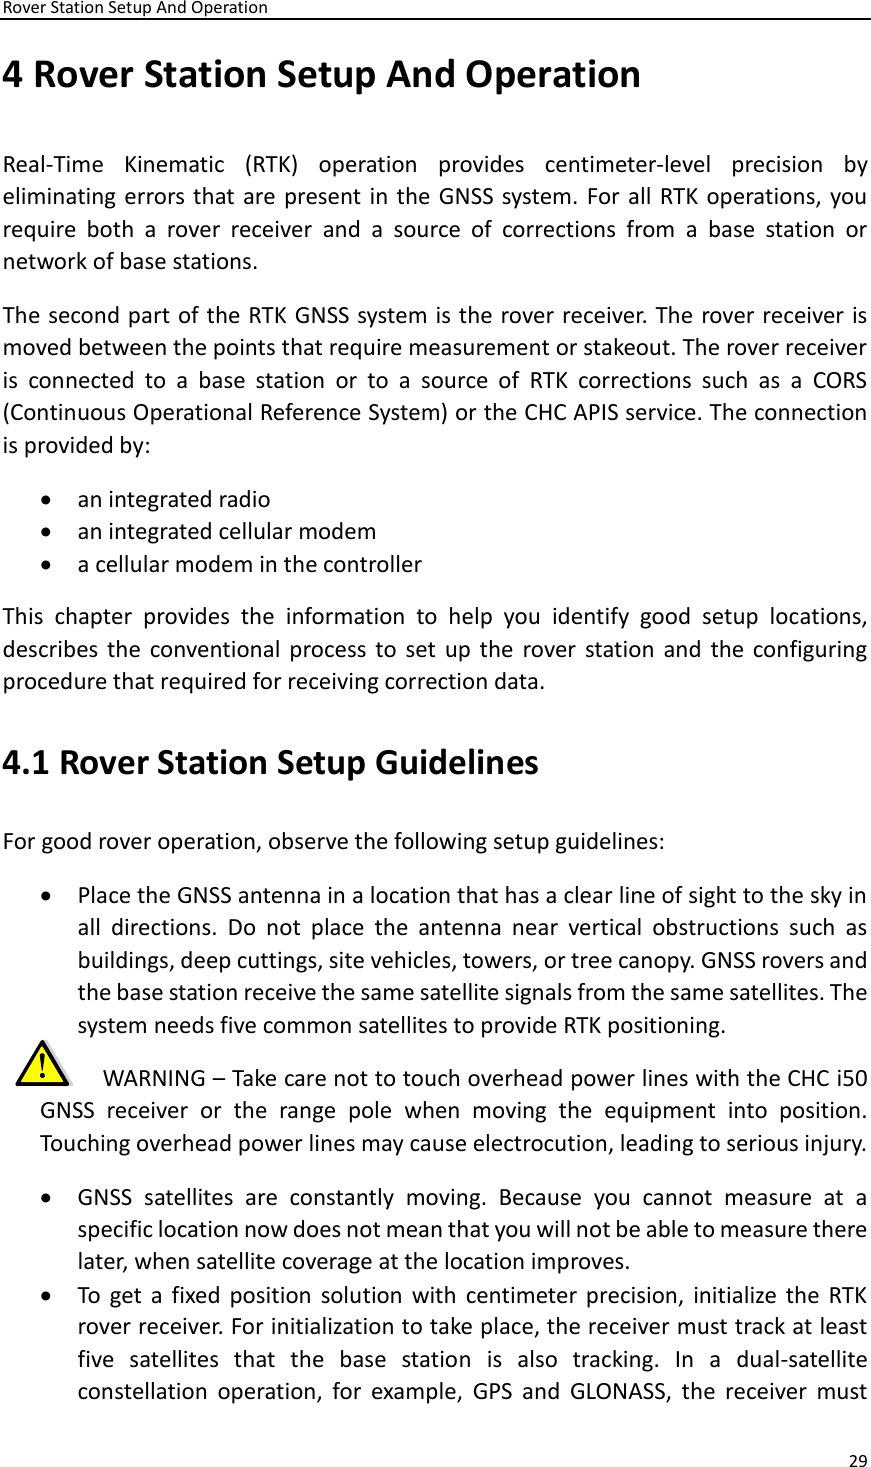 Page 29 of Huace Navigation Technology A01014 Geodetic GNSS Receiver i50U User Manual 